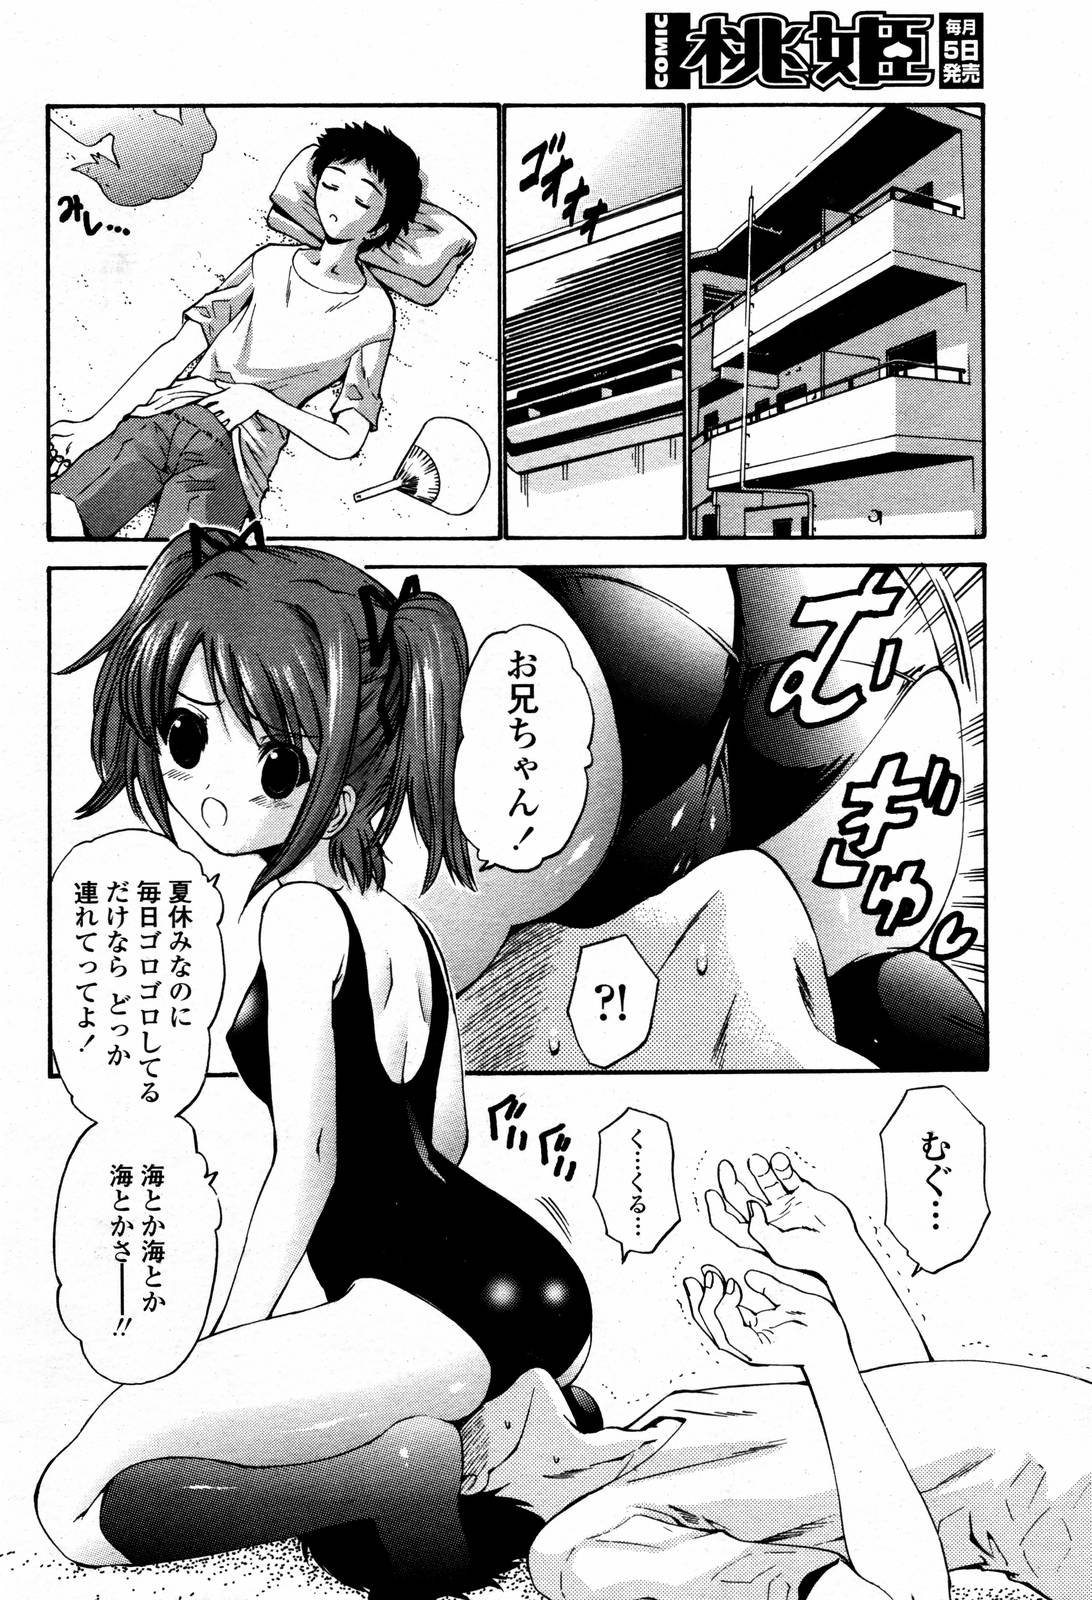 COMIC Momohime 2006-09 page 44 full